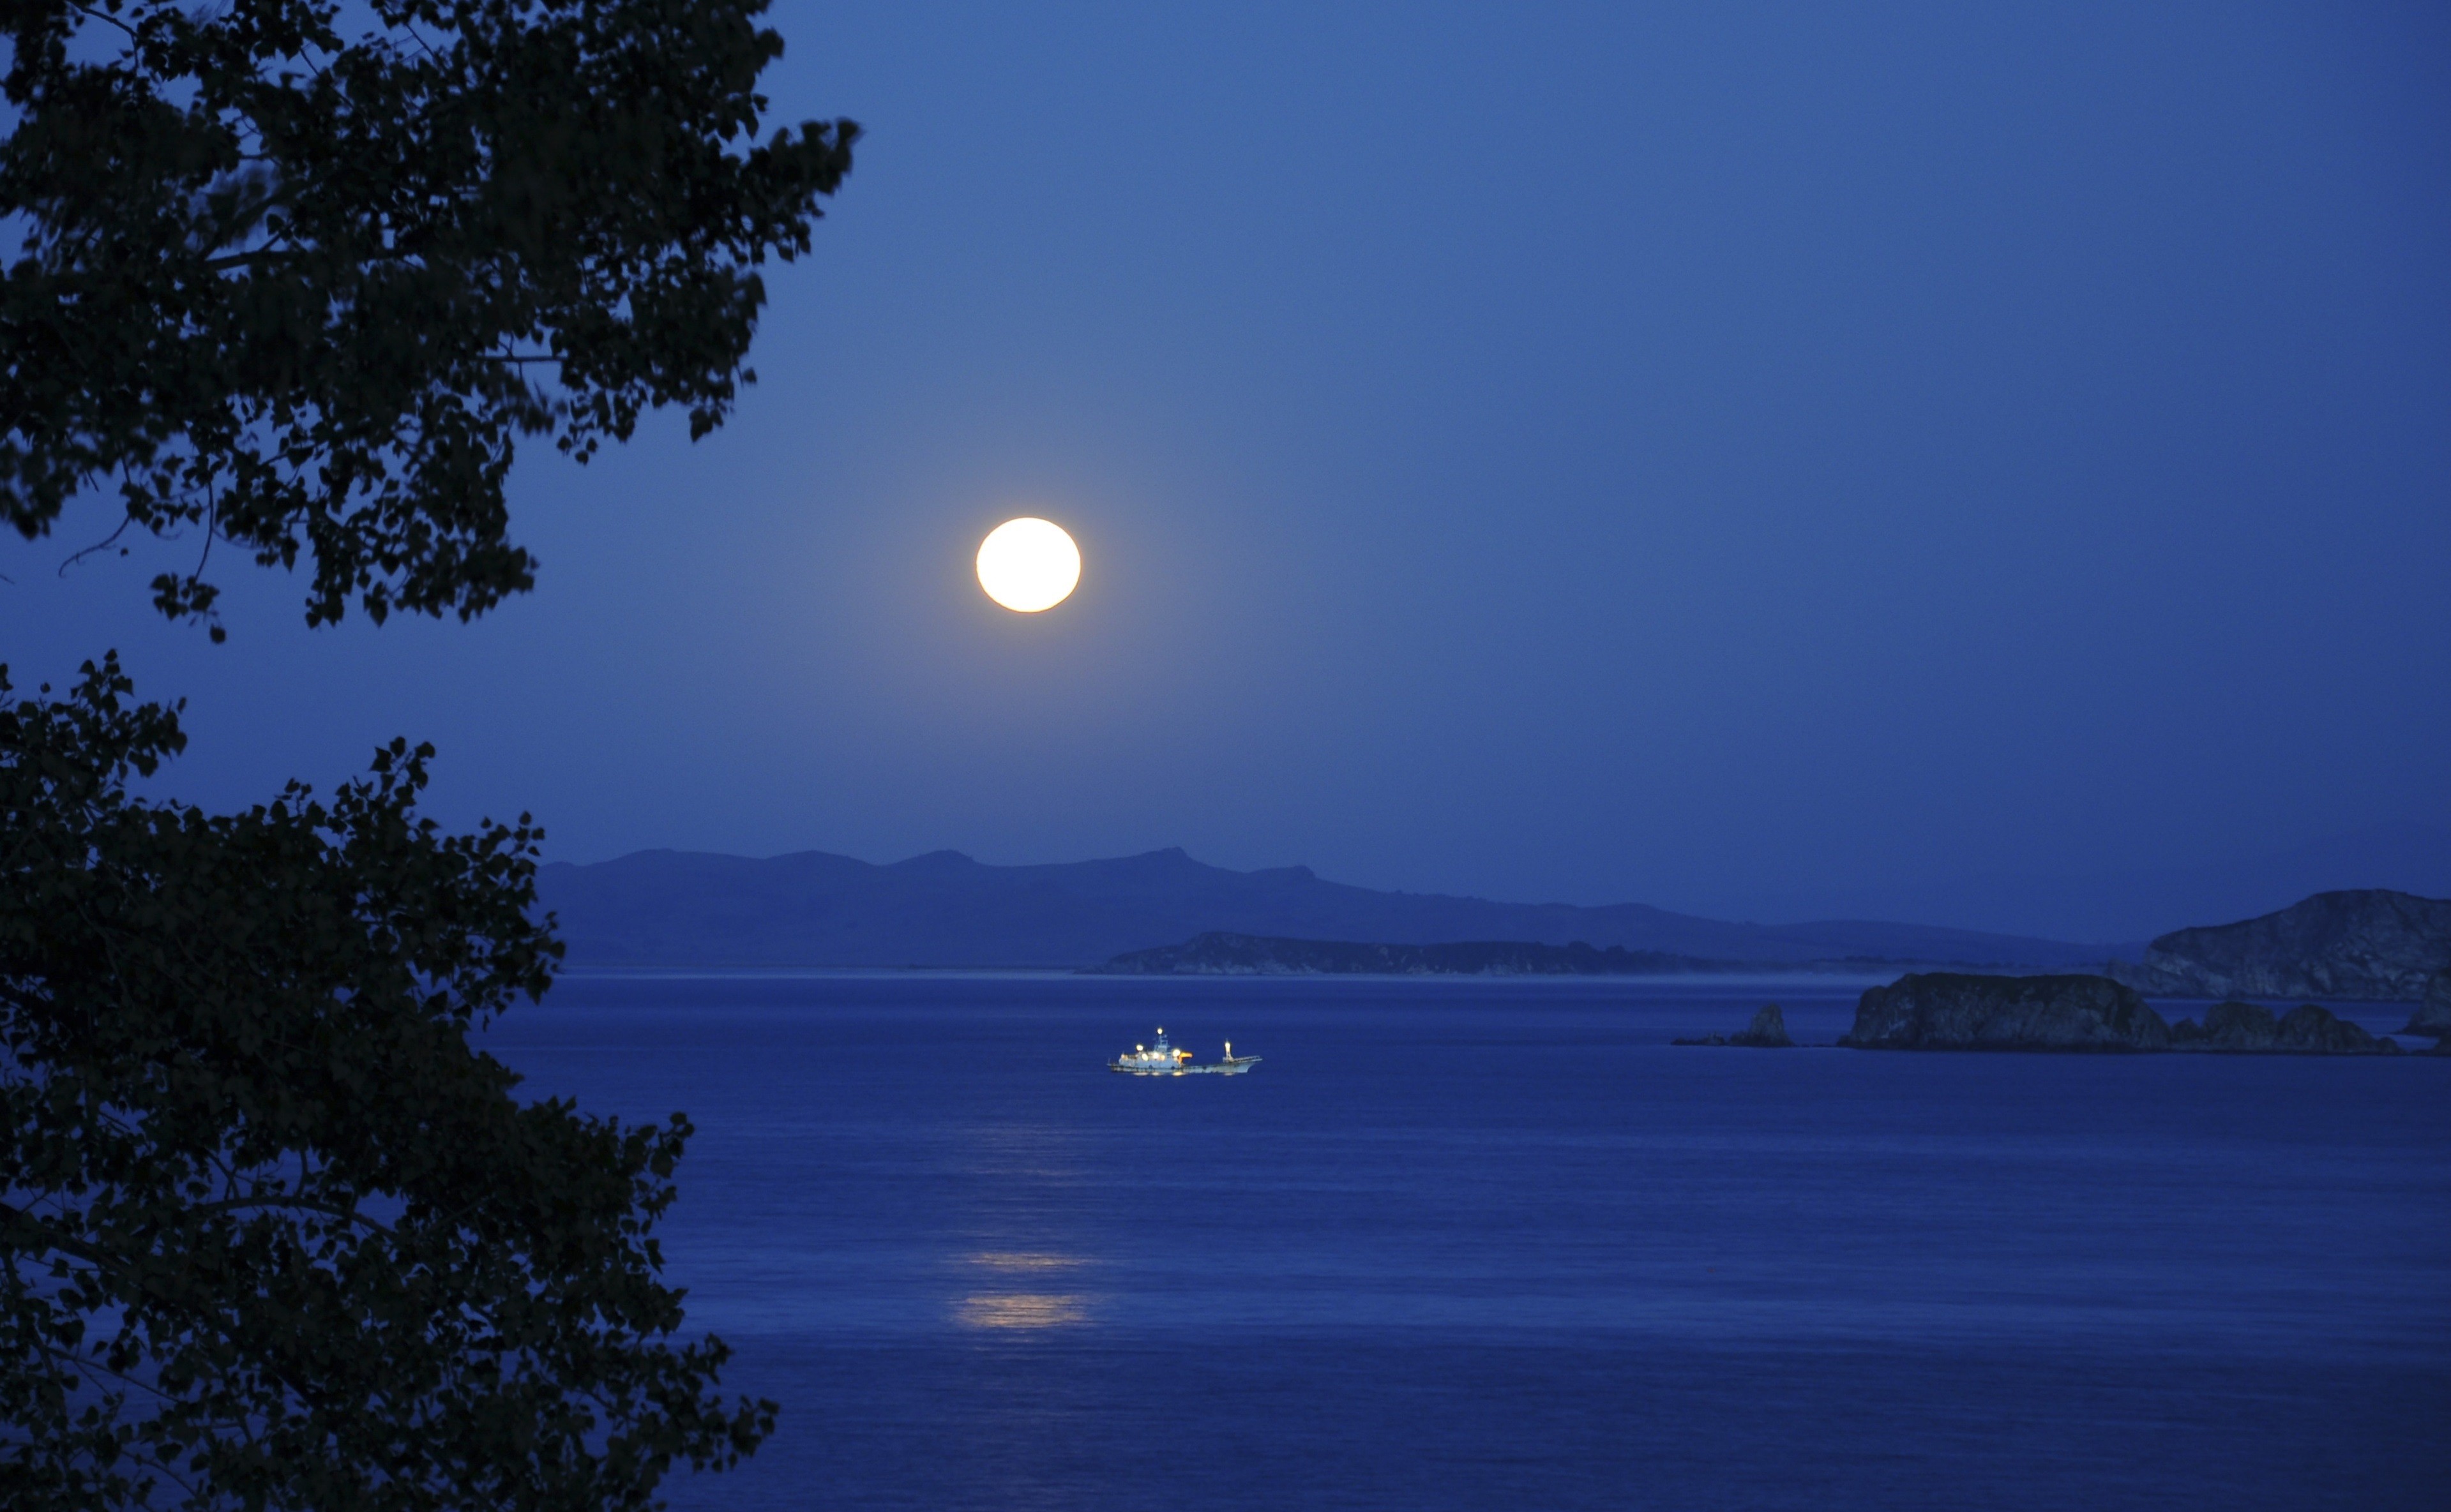 General 3839x2369 photography landscape water sea trees nature night Moon coast rock formation ship blue low light